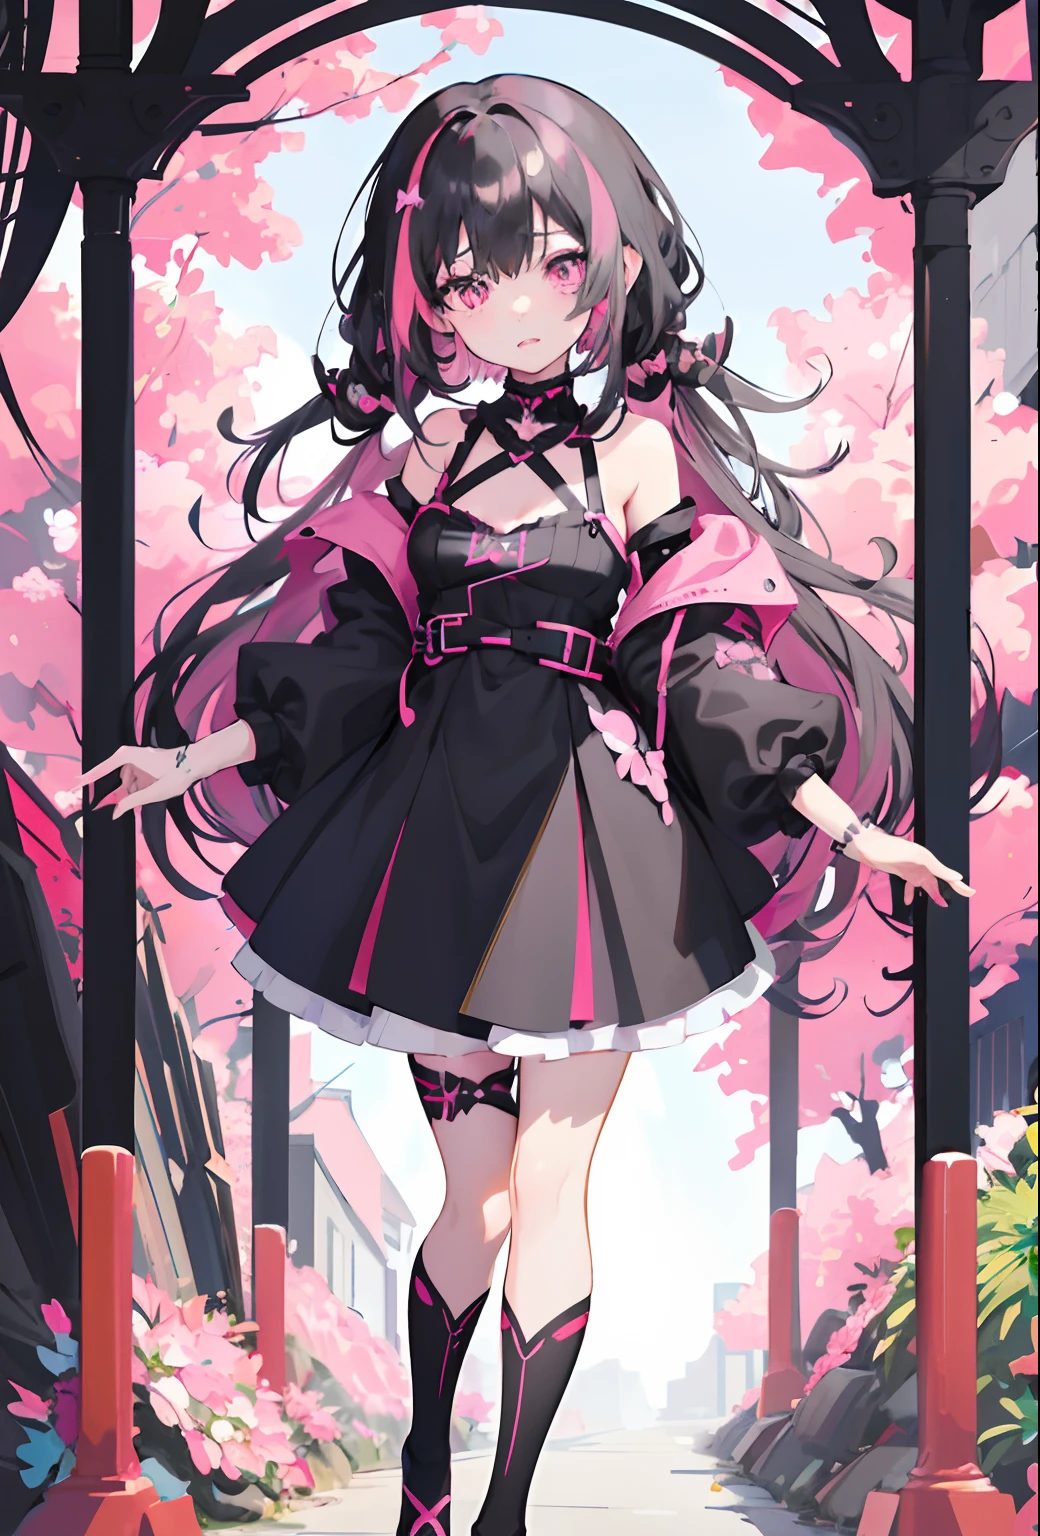 anime girl in a black dress with pink accents, pink and black goth dress, white background, cute anime waifu in a nice dress, anime girl wearing a black dress,  in dress, anime moe artstyle, anime style 4 k, gothic maiden anime girl, anime style. 8k, guweiz on pixiv artstation, 8k high quality detailed art